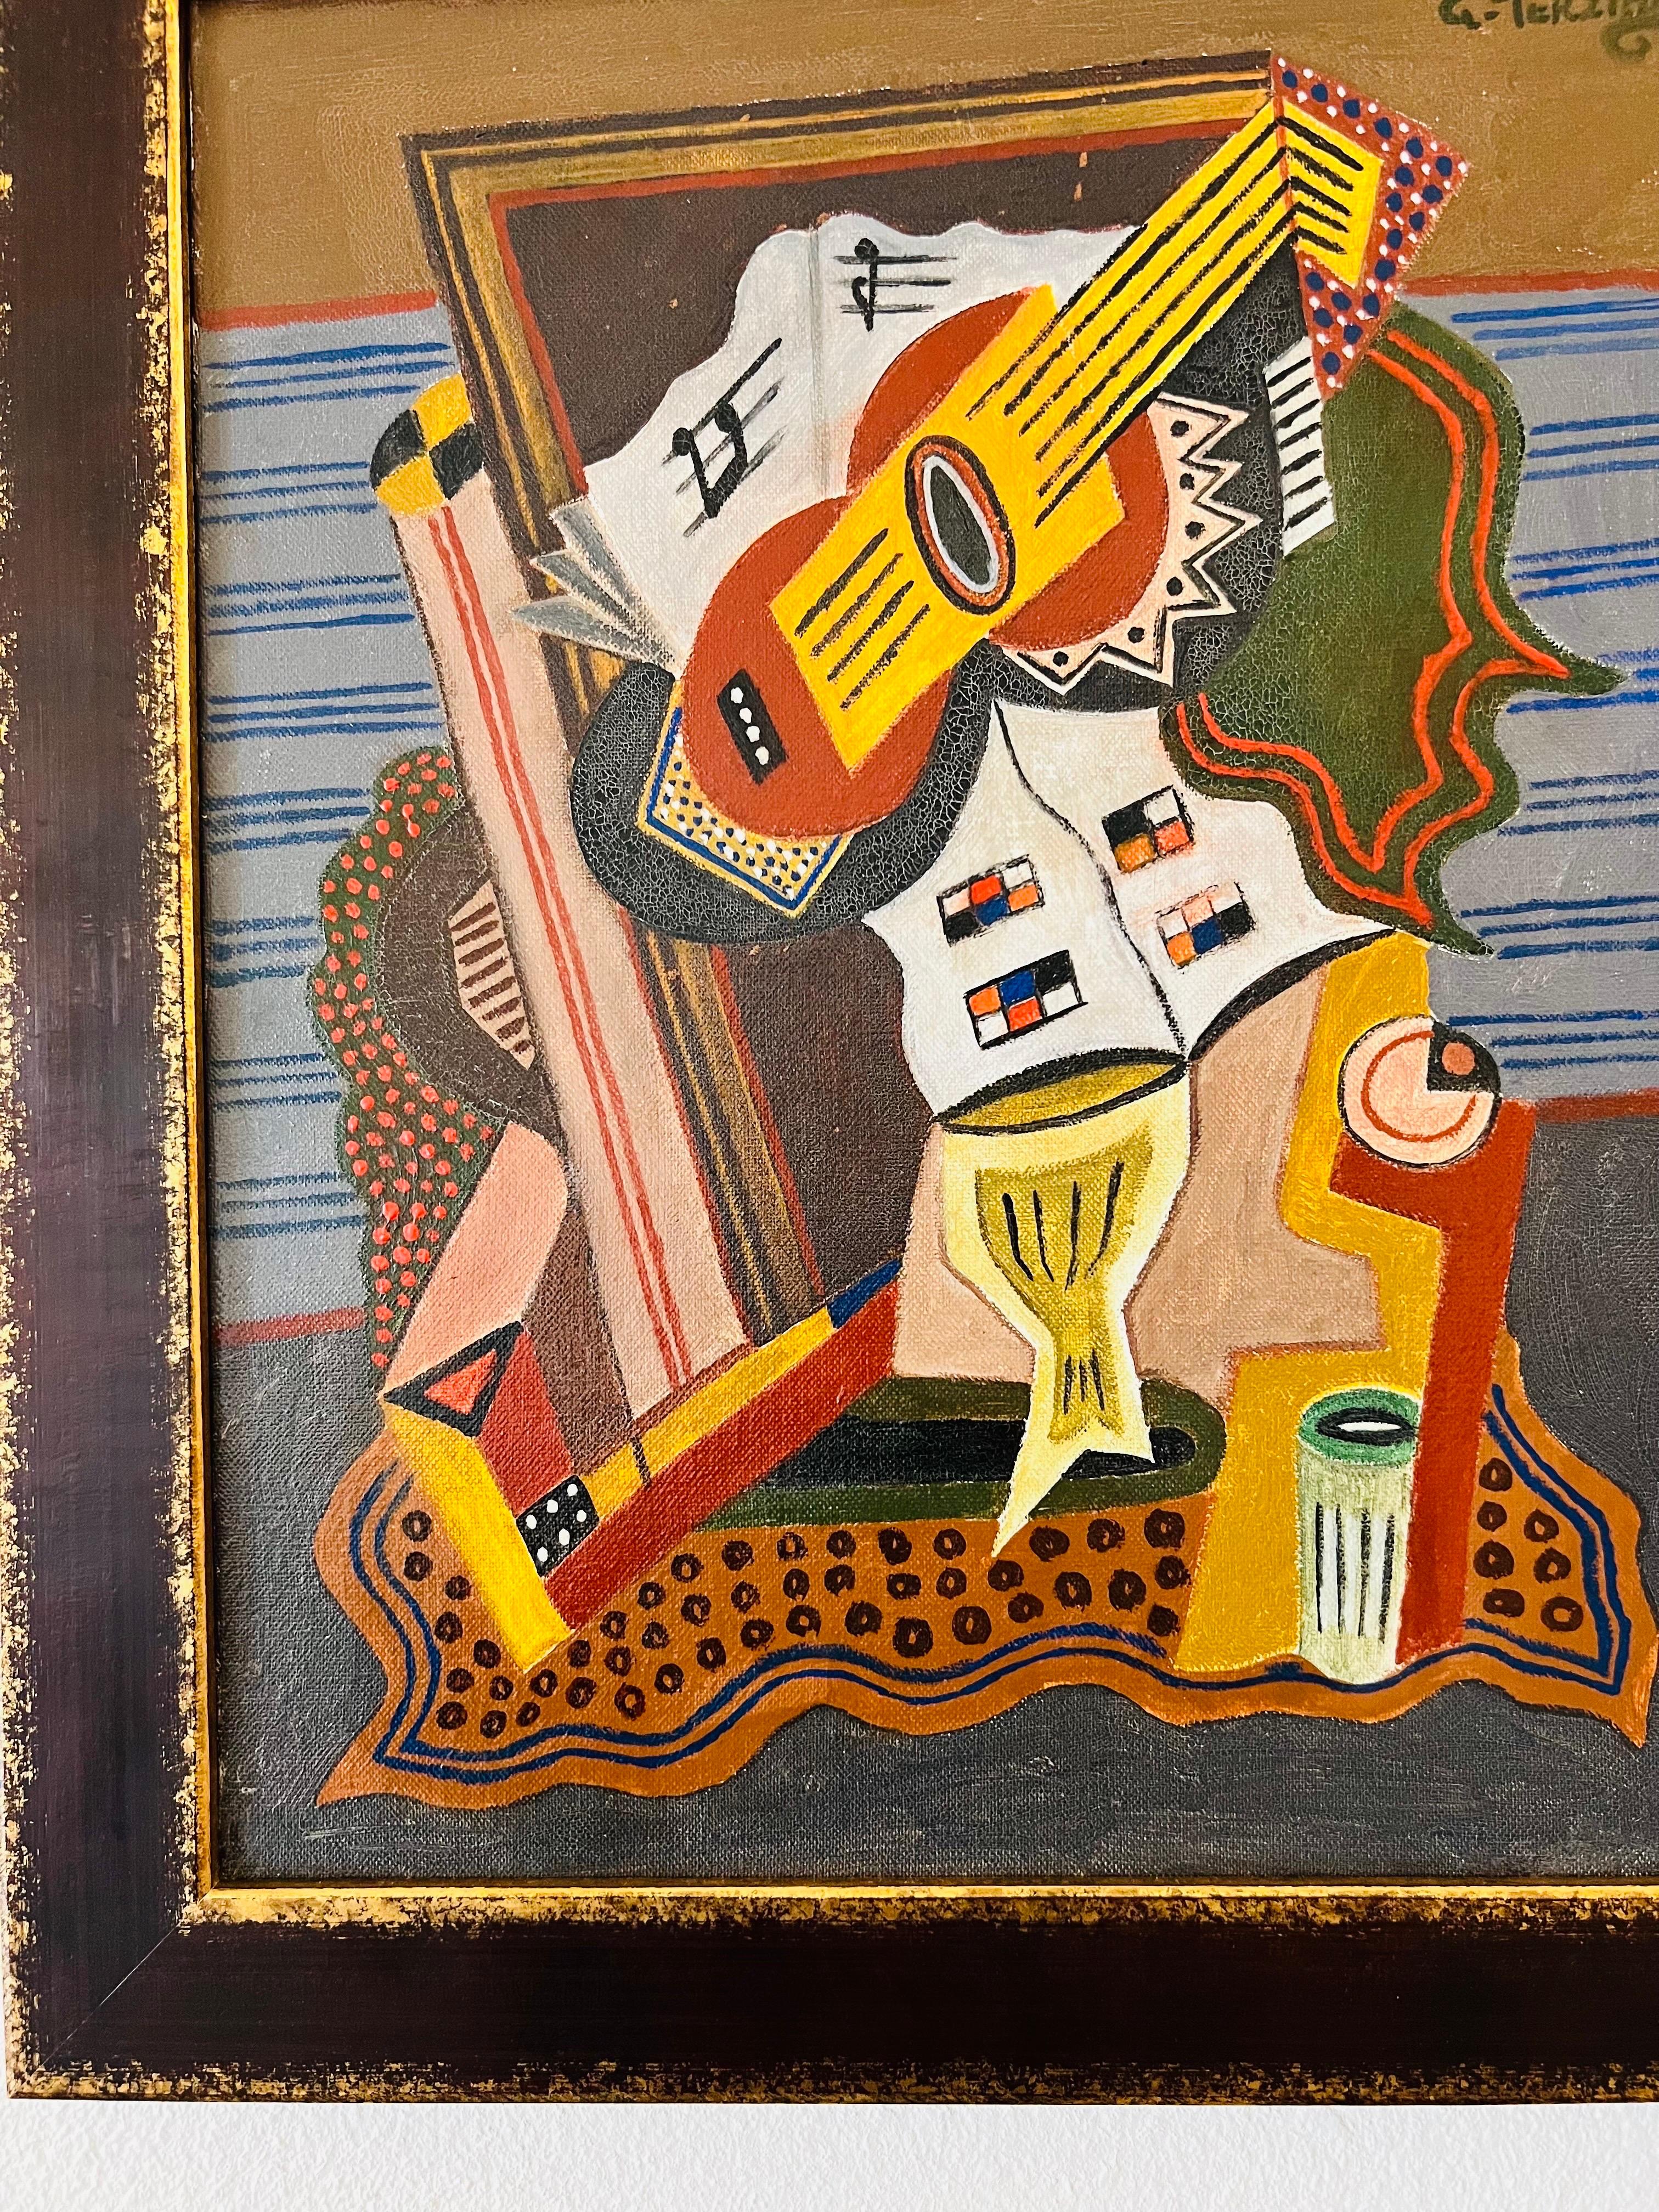 Composition with guitar 2